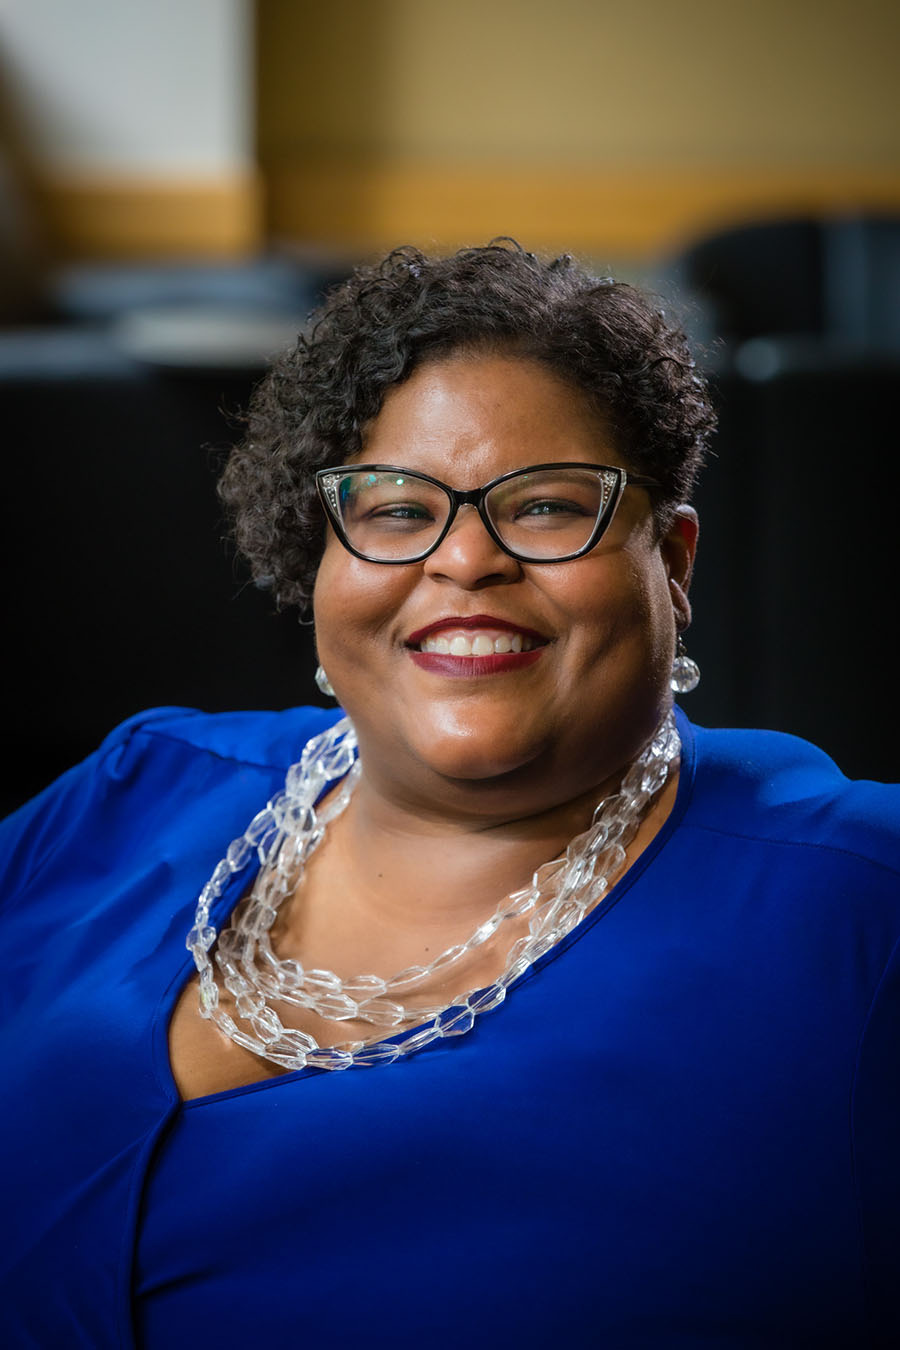 Dr. Leslie K. Doyle, a 1997 alumna of Northwest, is chief inclusion officer at Rockhurst University in Kansas City. Doyle is Karen Daniel's niece and routinely inspires her and the entire family, Daniel says. (Northwest Missouri State University photo)